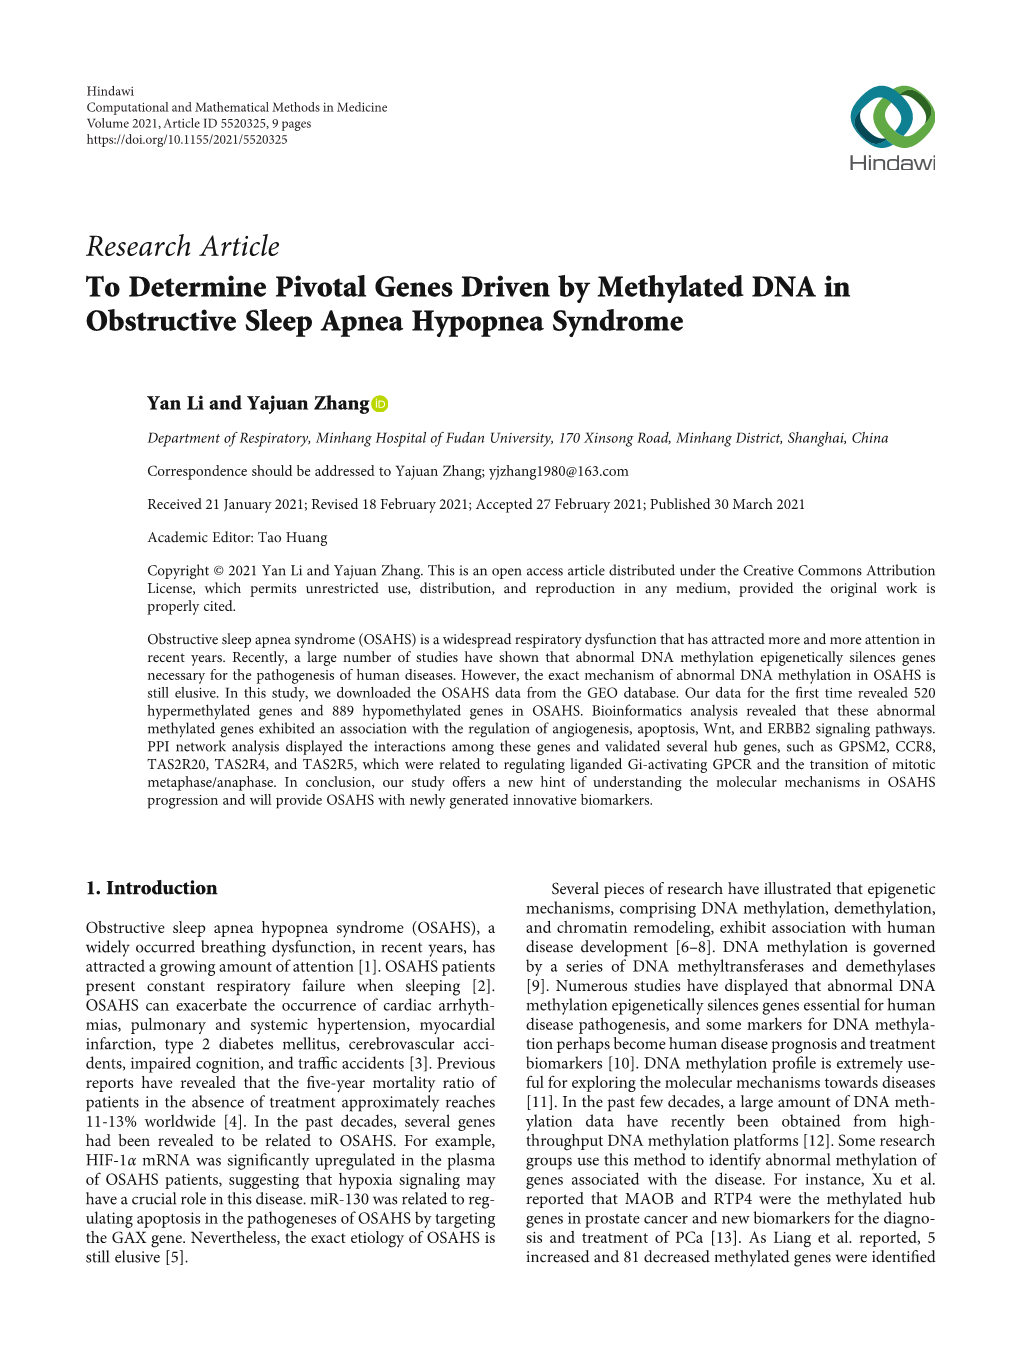 To Determine Pivotal Genes Driven by Methylated DNA in Obstructive Sleep Apnea Hypopnea Syndrome